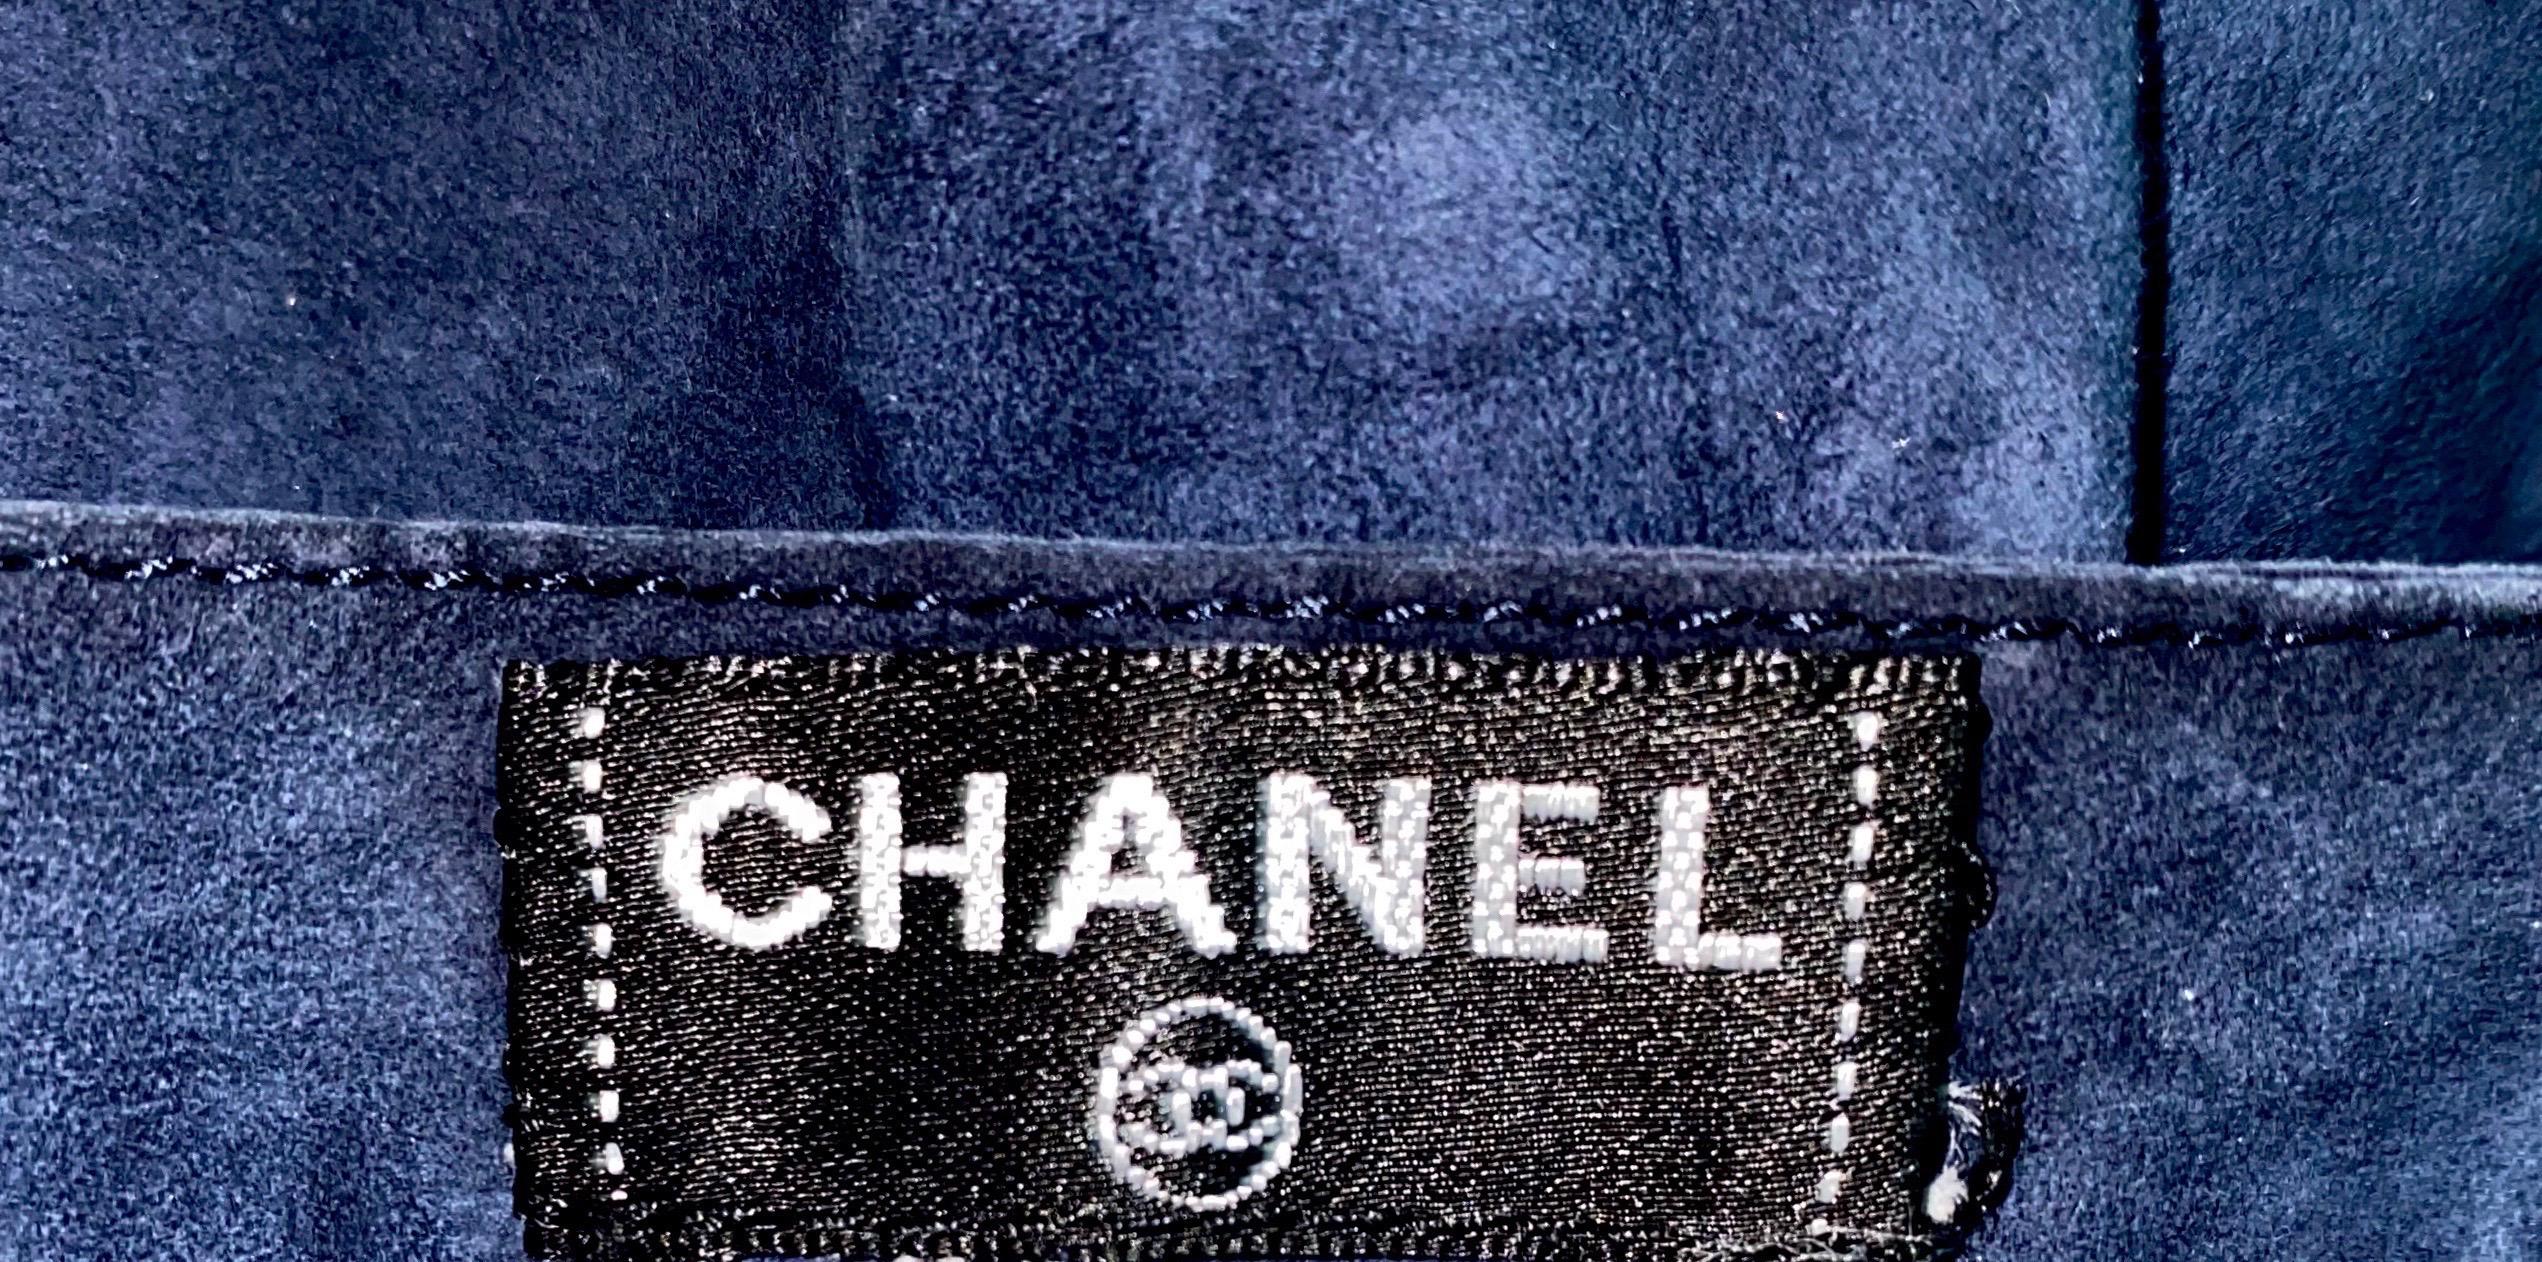 Black Chanel Suede Leather Hot Pants Shorts Jewelled Button